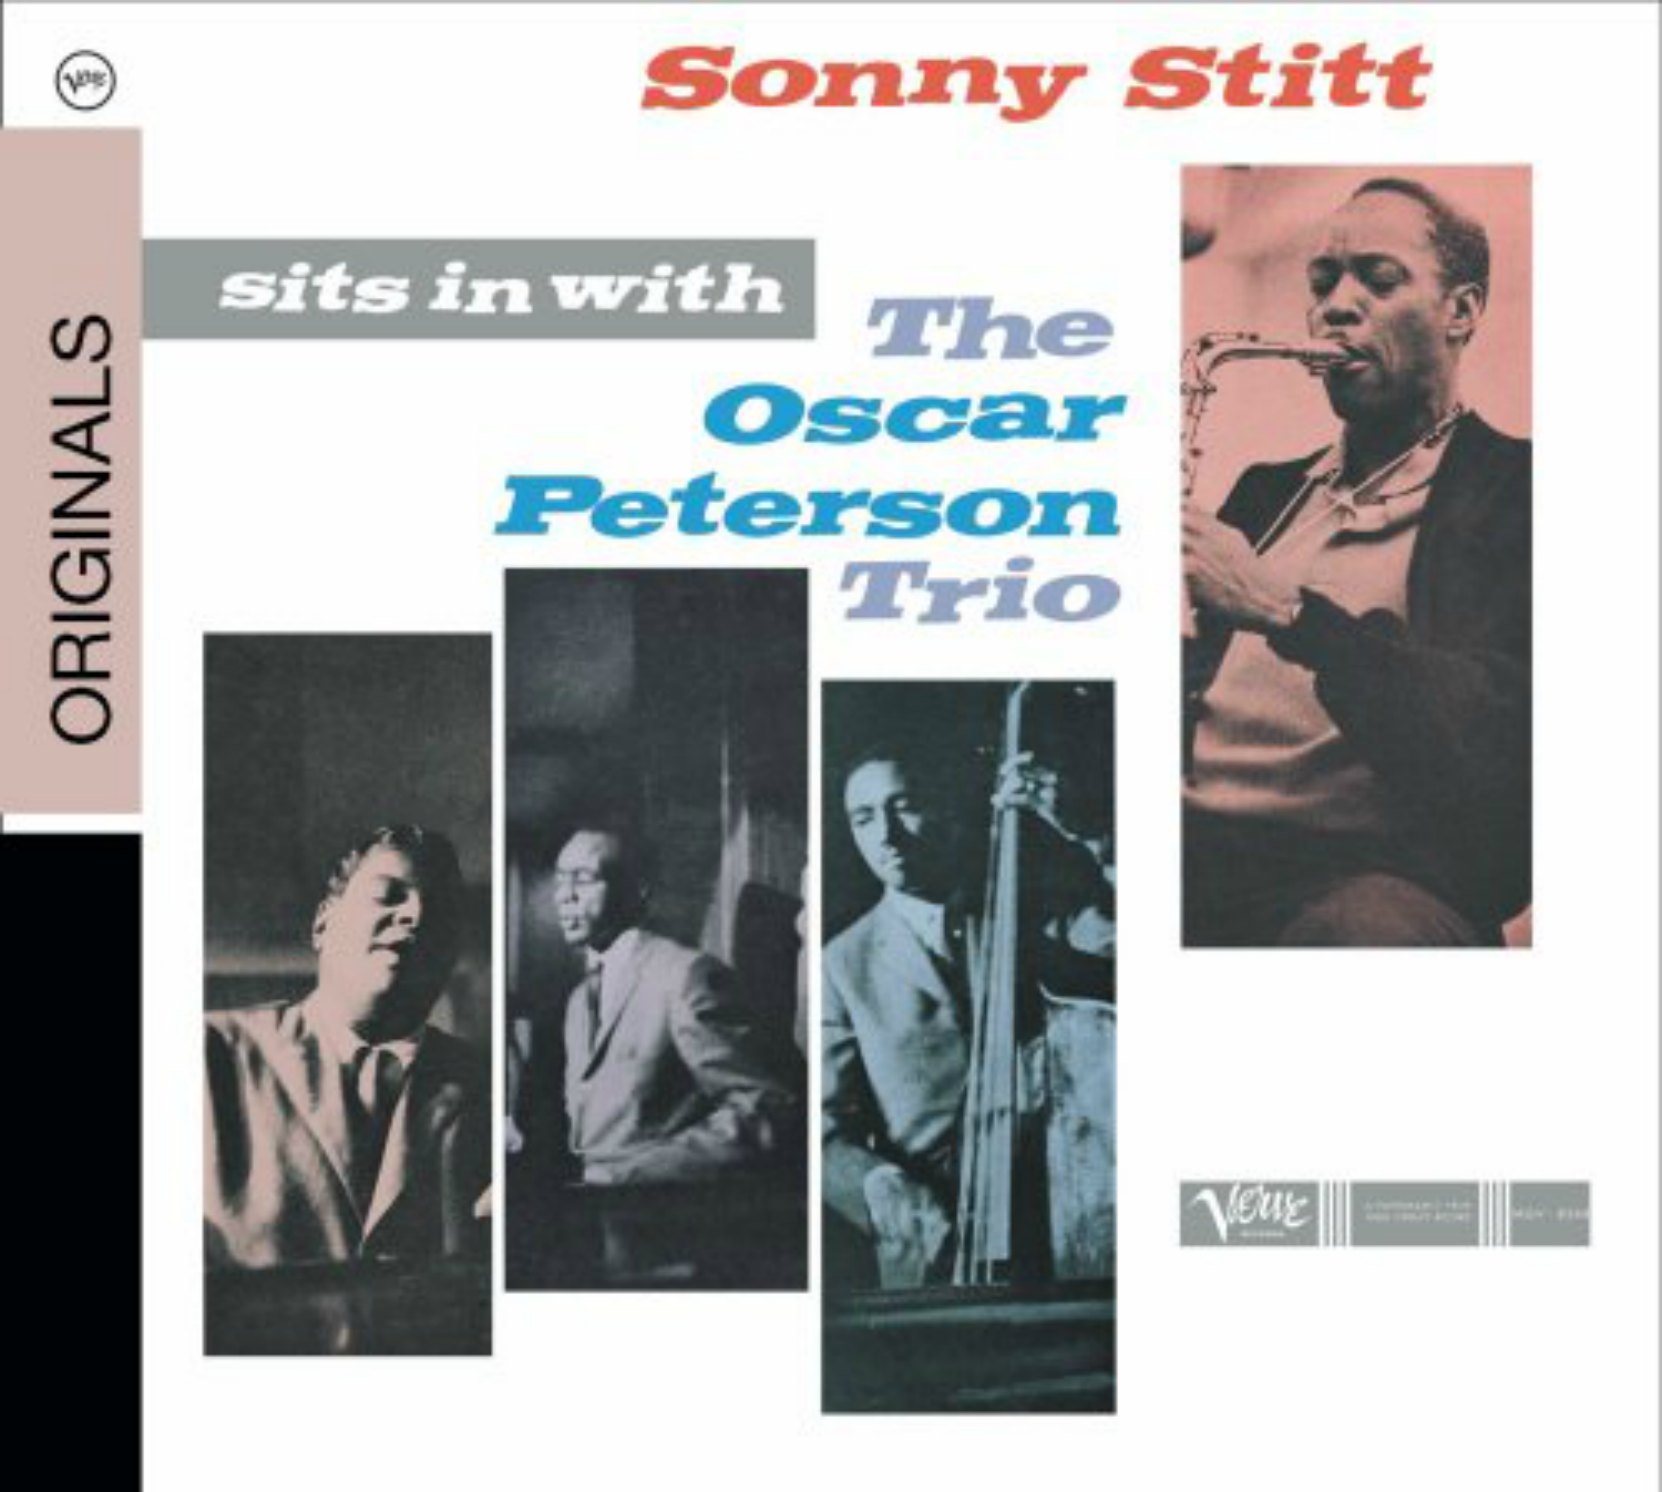 CD cover, Sonny Stitt Sits In With The Oscar Peterson Trio - Verve Records